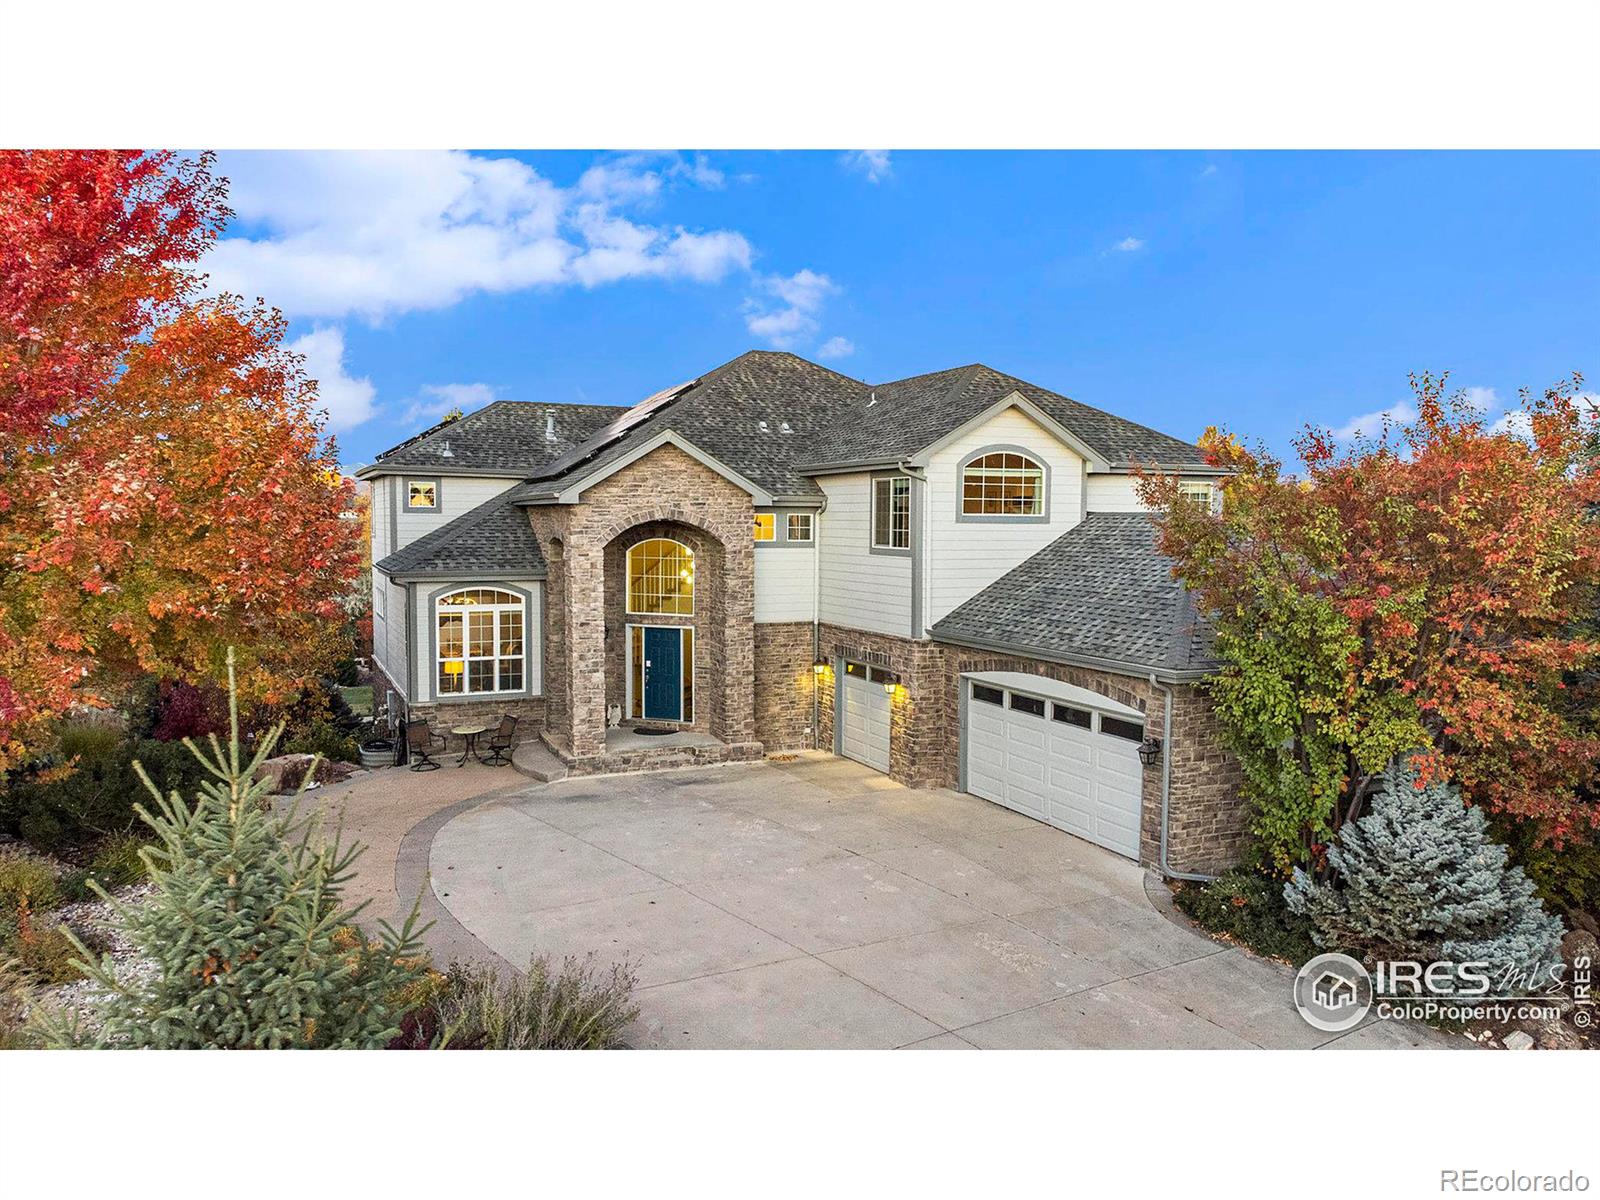 Report Image for 6509  Westchase Court,Fort Collins, Colorado